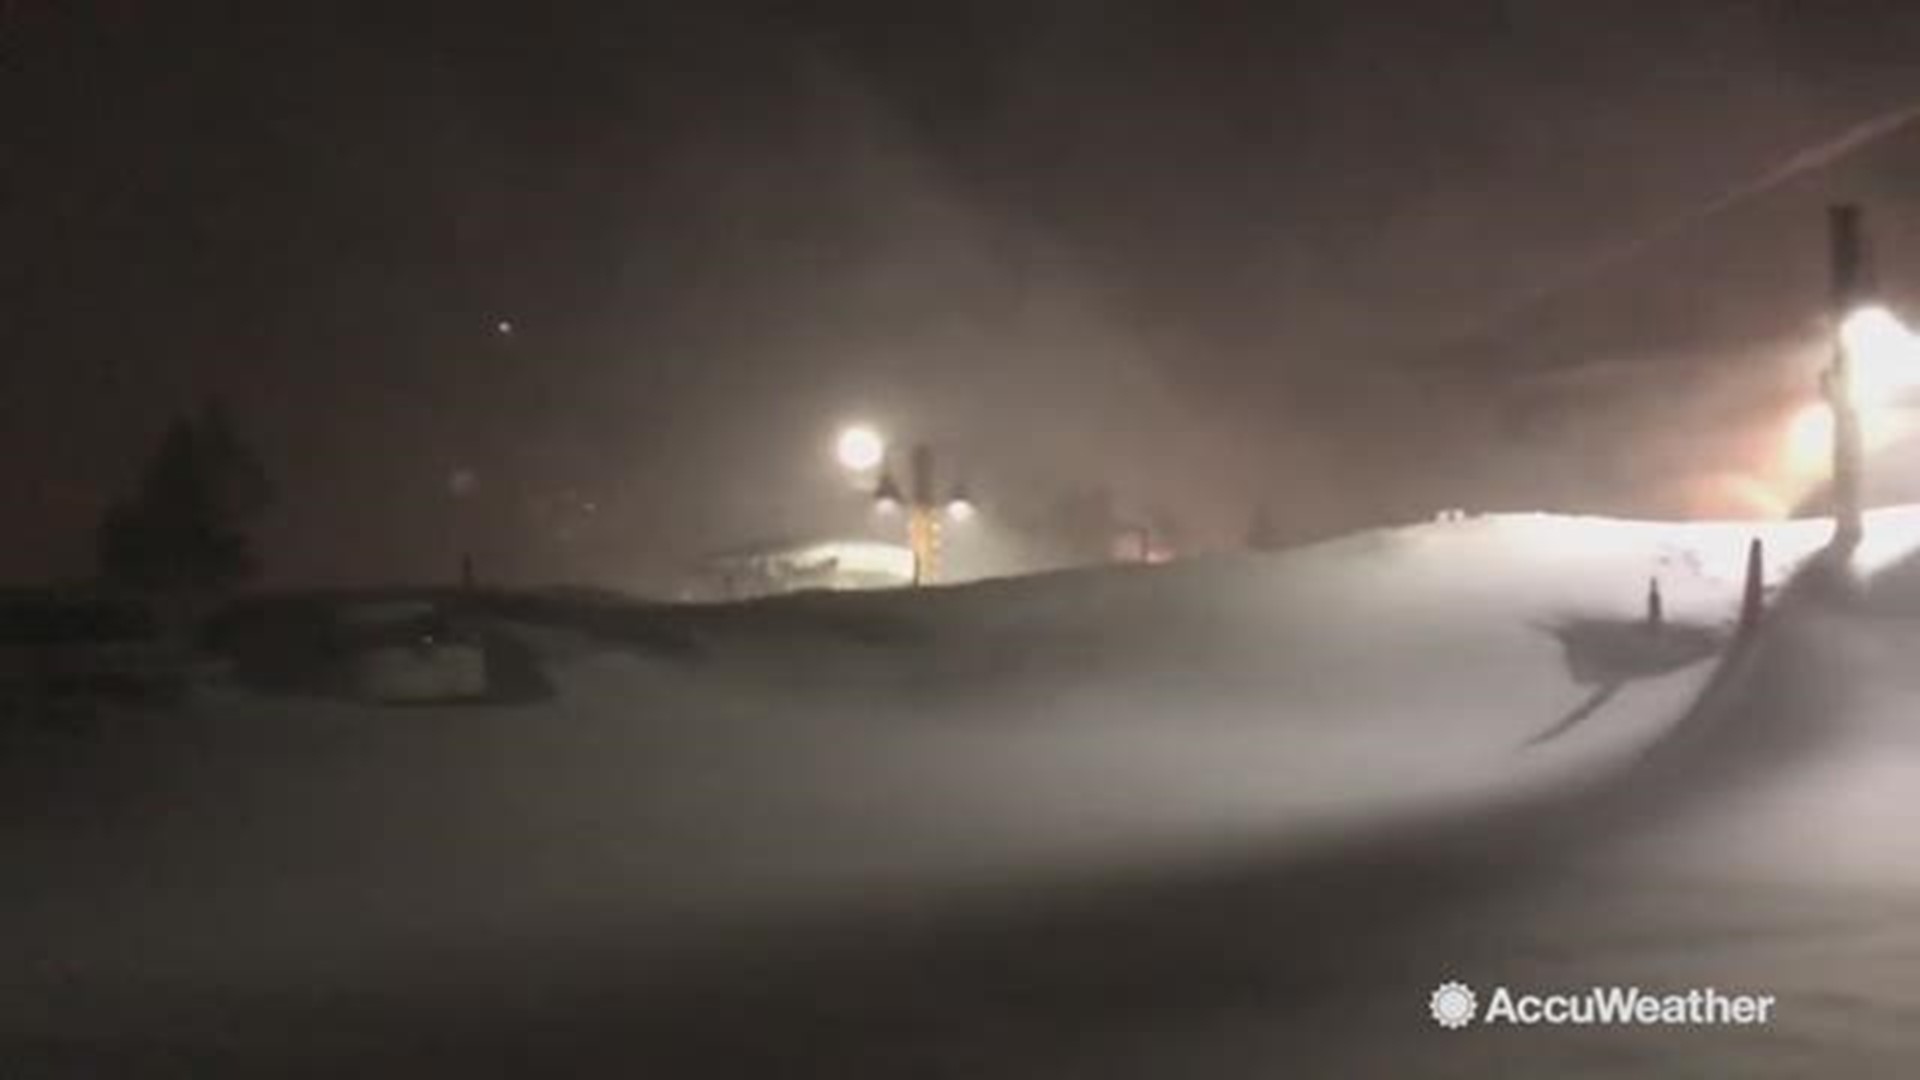 Blizzard conditions pounded Mammoth Lakes, California, on January 17, whipping snow all around.